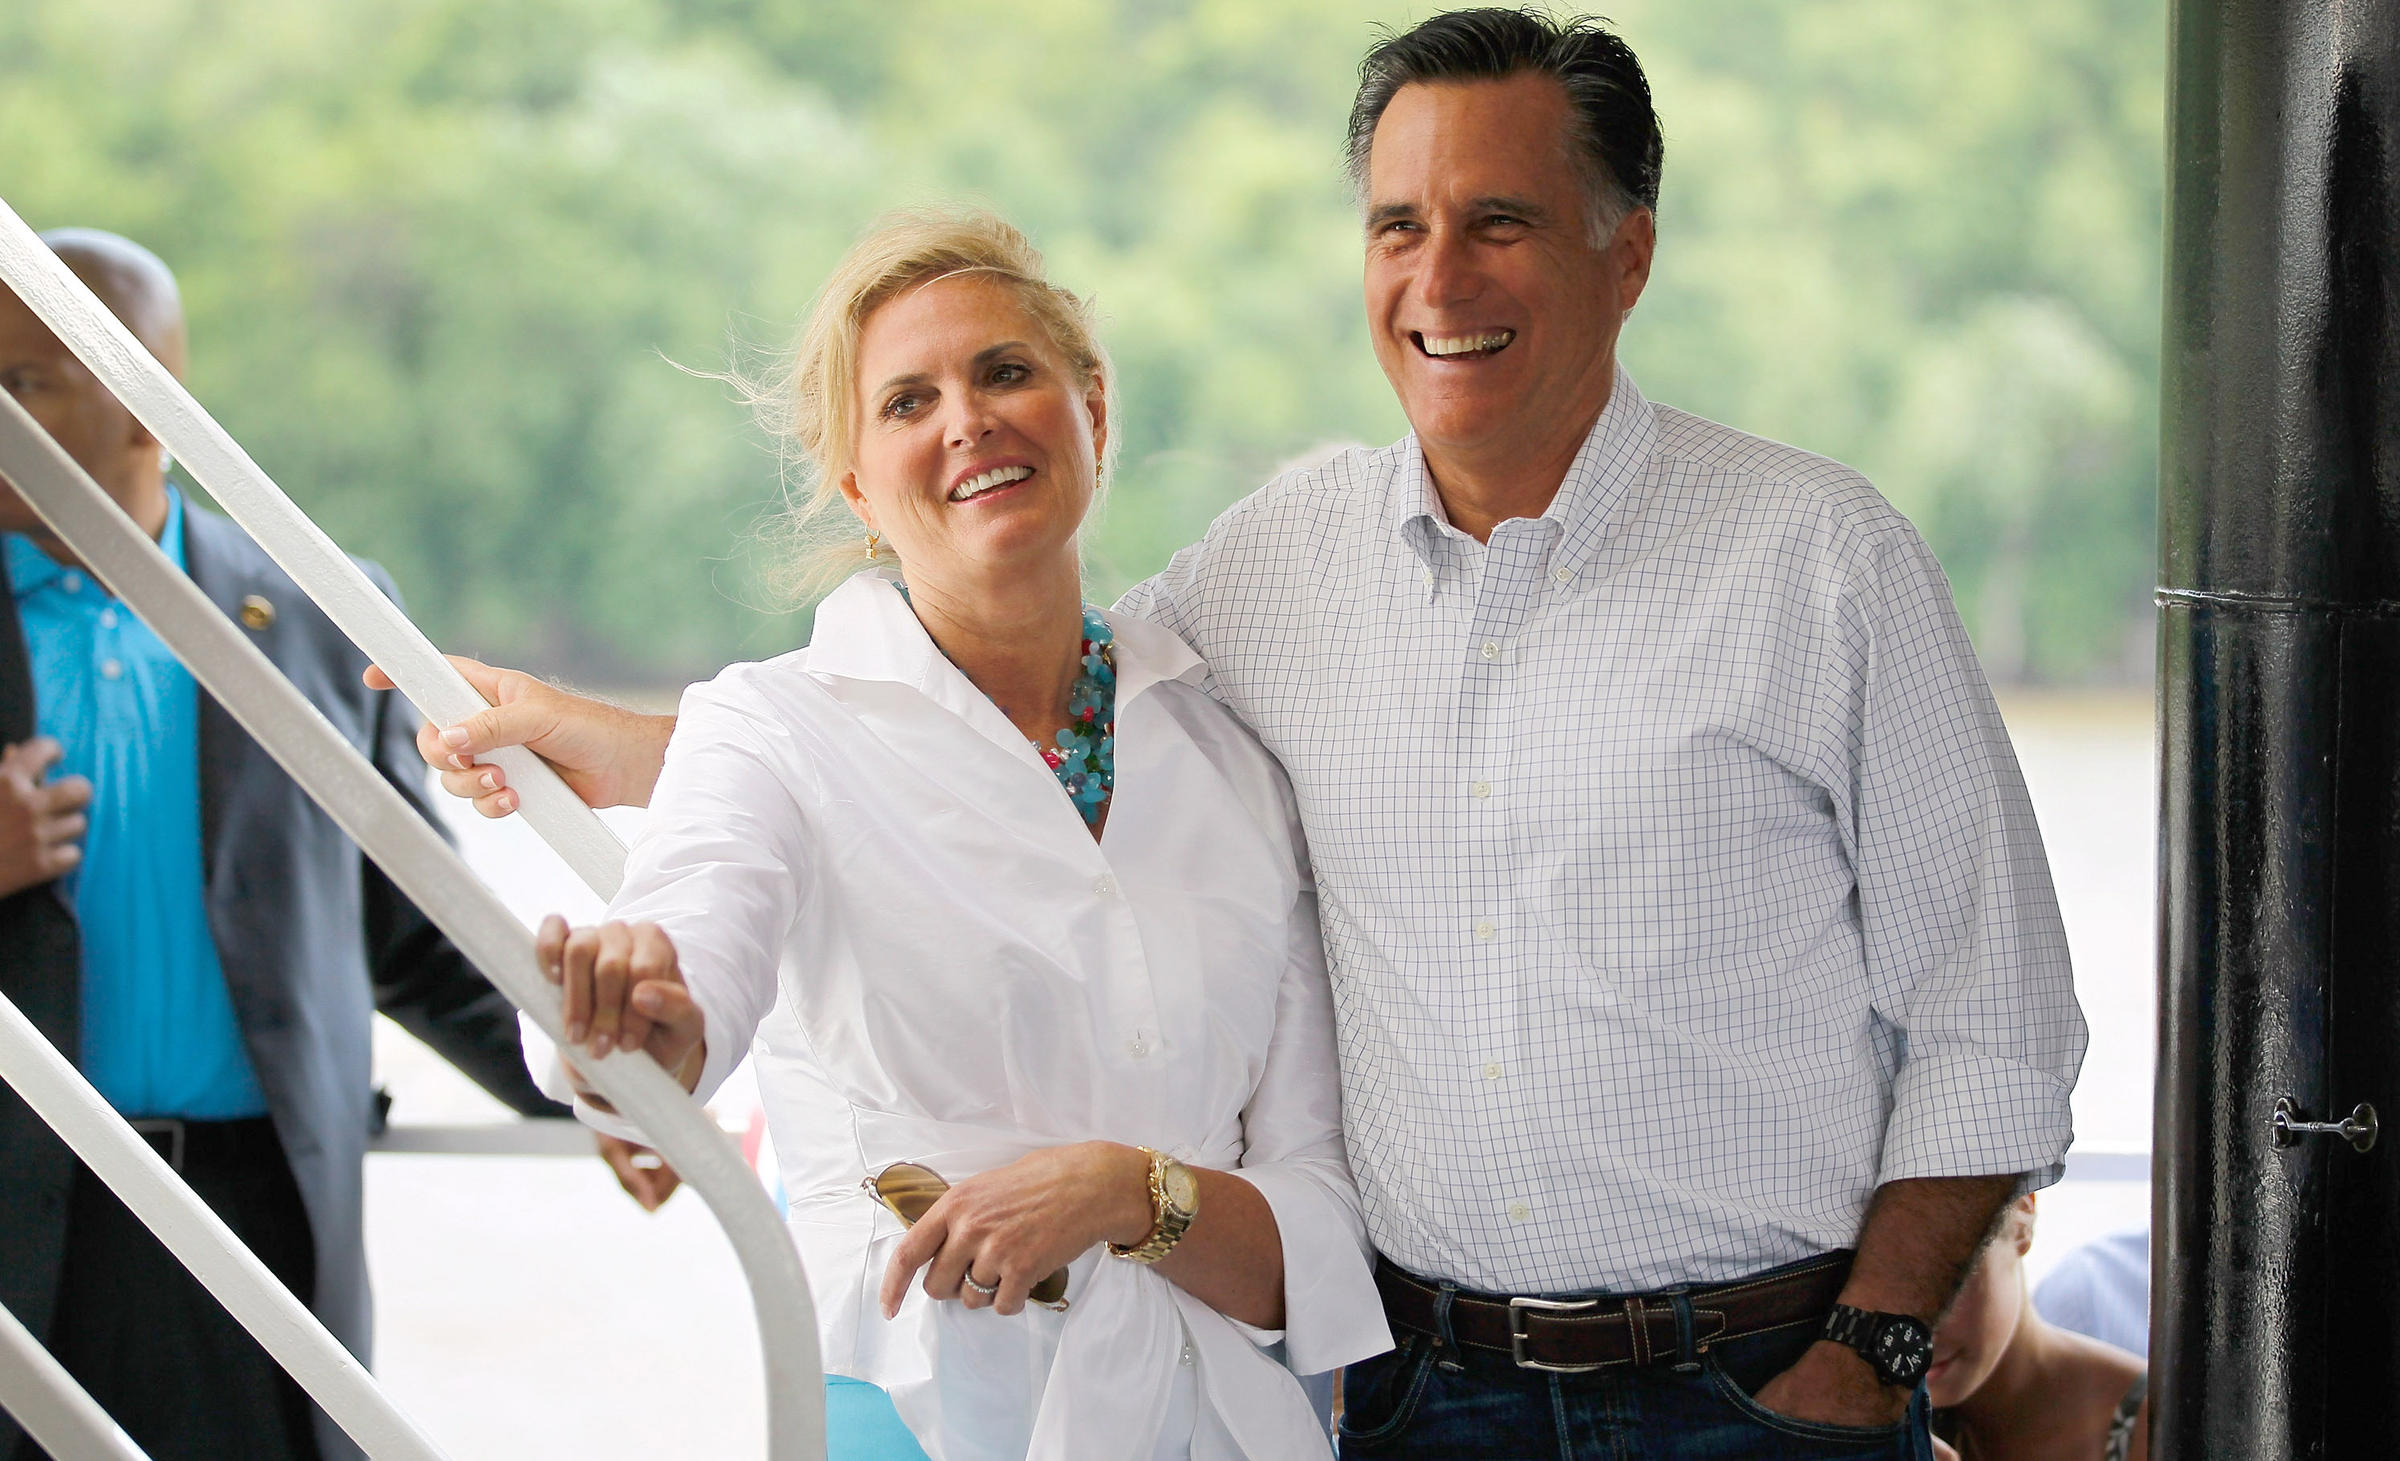 Ann Romney Adds Fire, Faith To Husbands Campaign WBFO pic photo